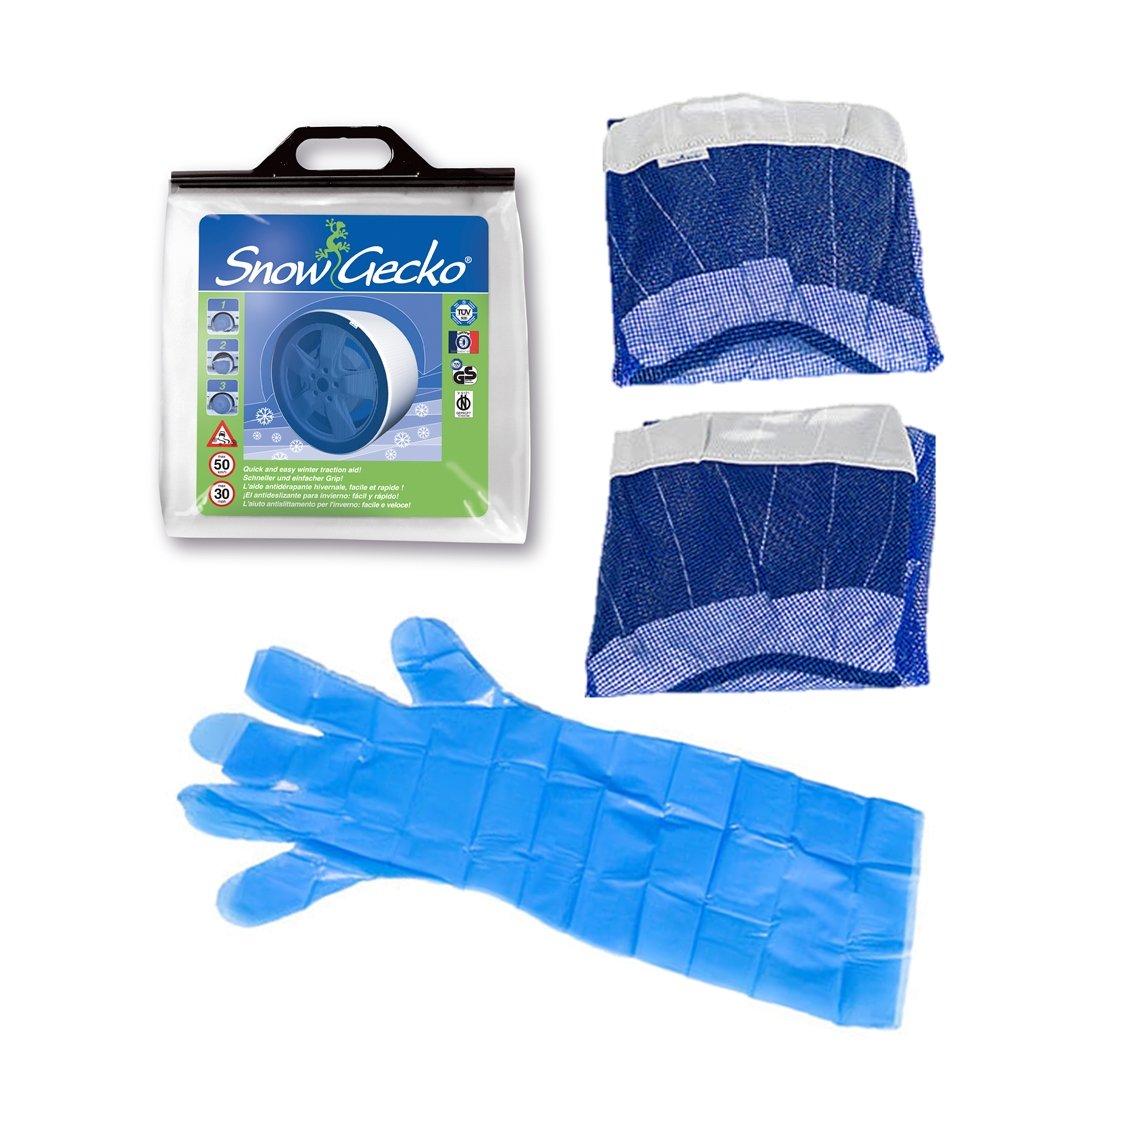 SnowGecko Medium bag includes a pair of tire socks and gloves